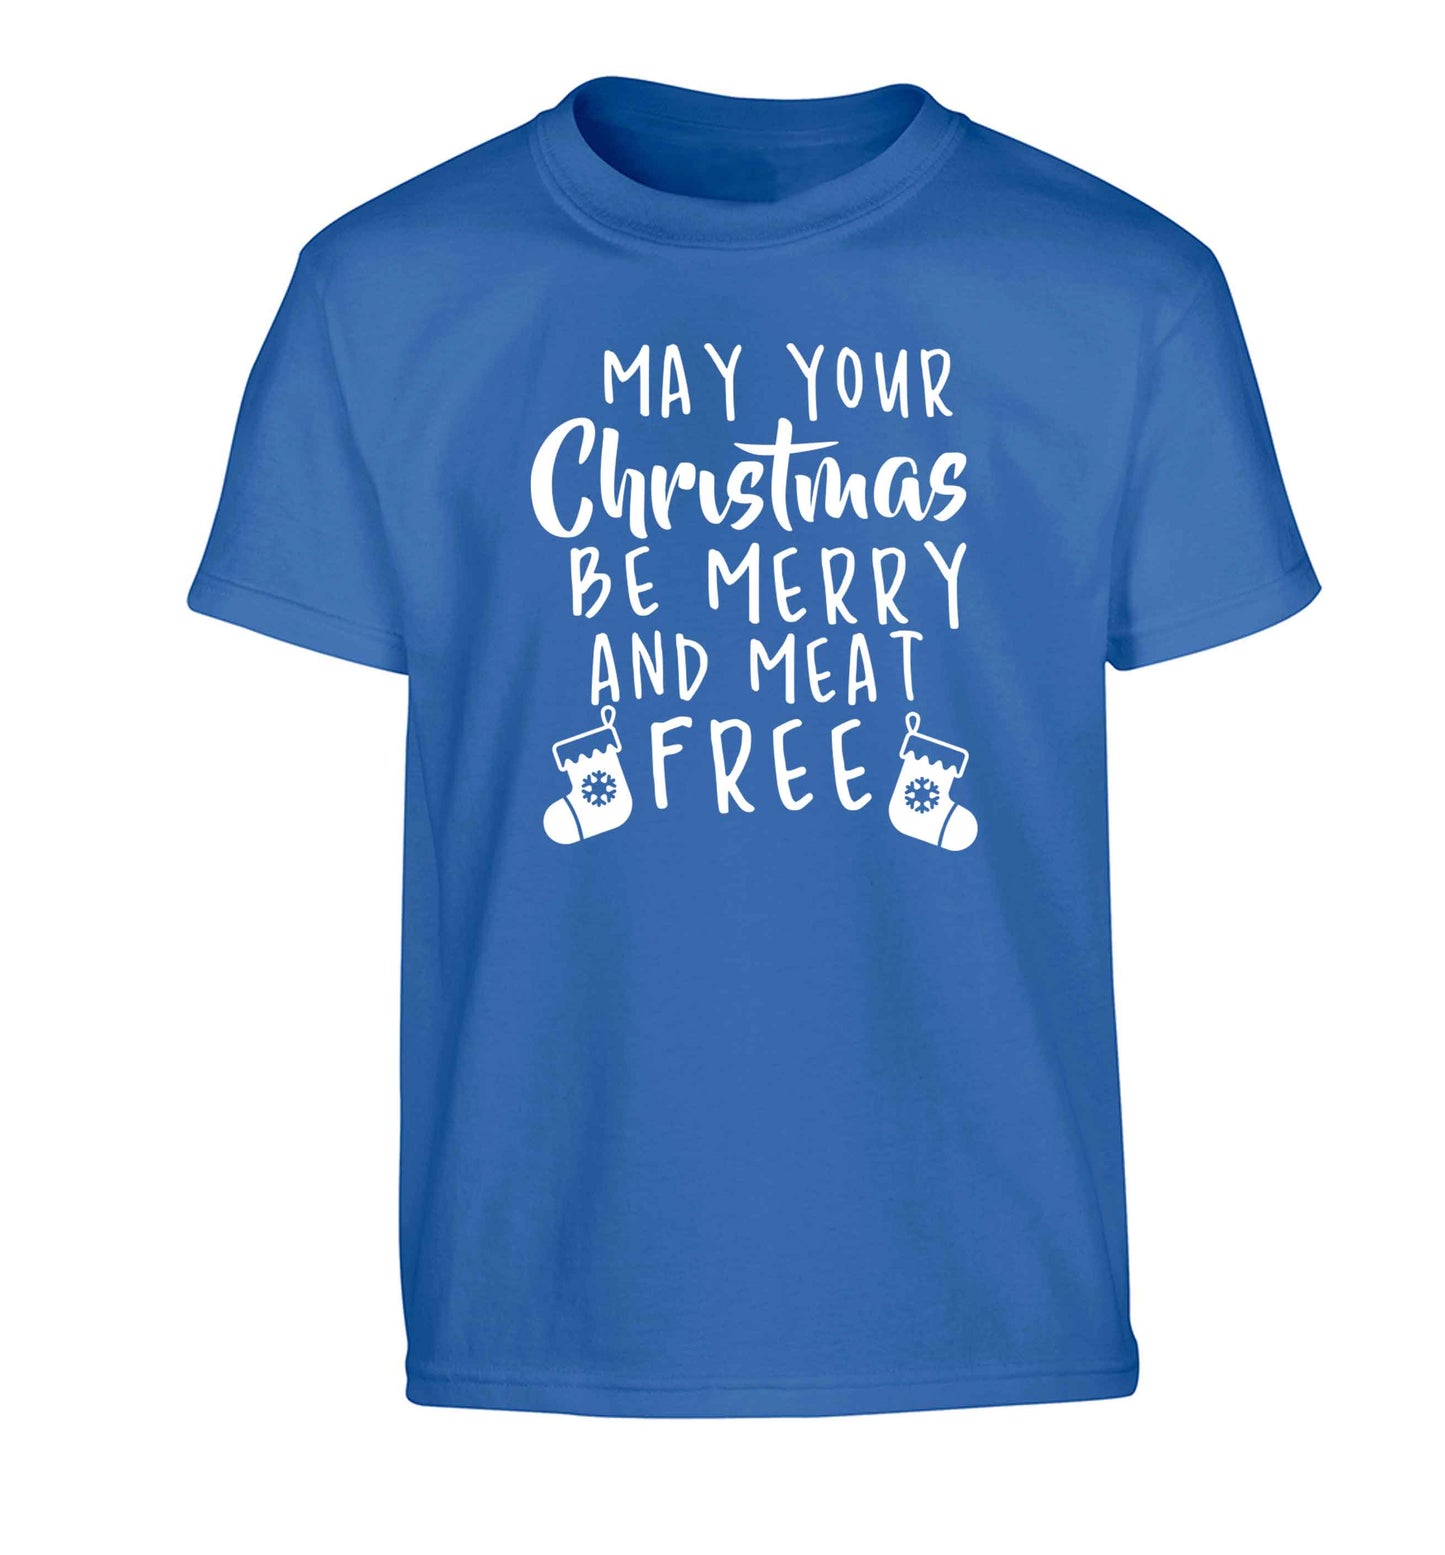 May your Christmas be merry and meat free Children's blue Tshirt 12-13 Years